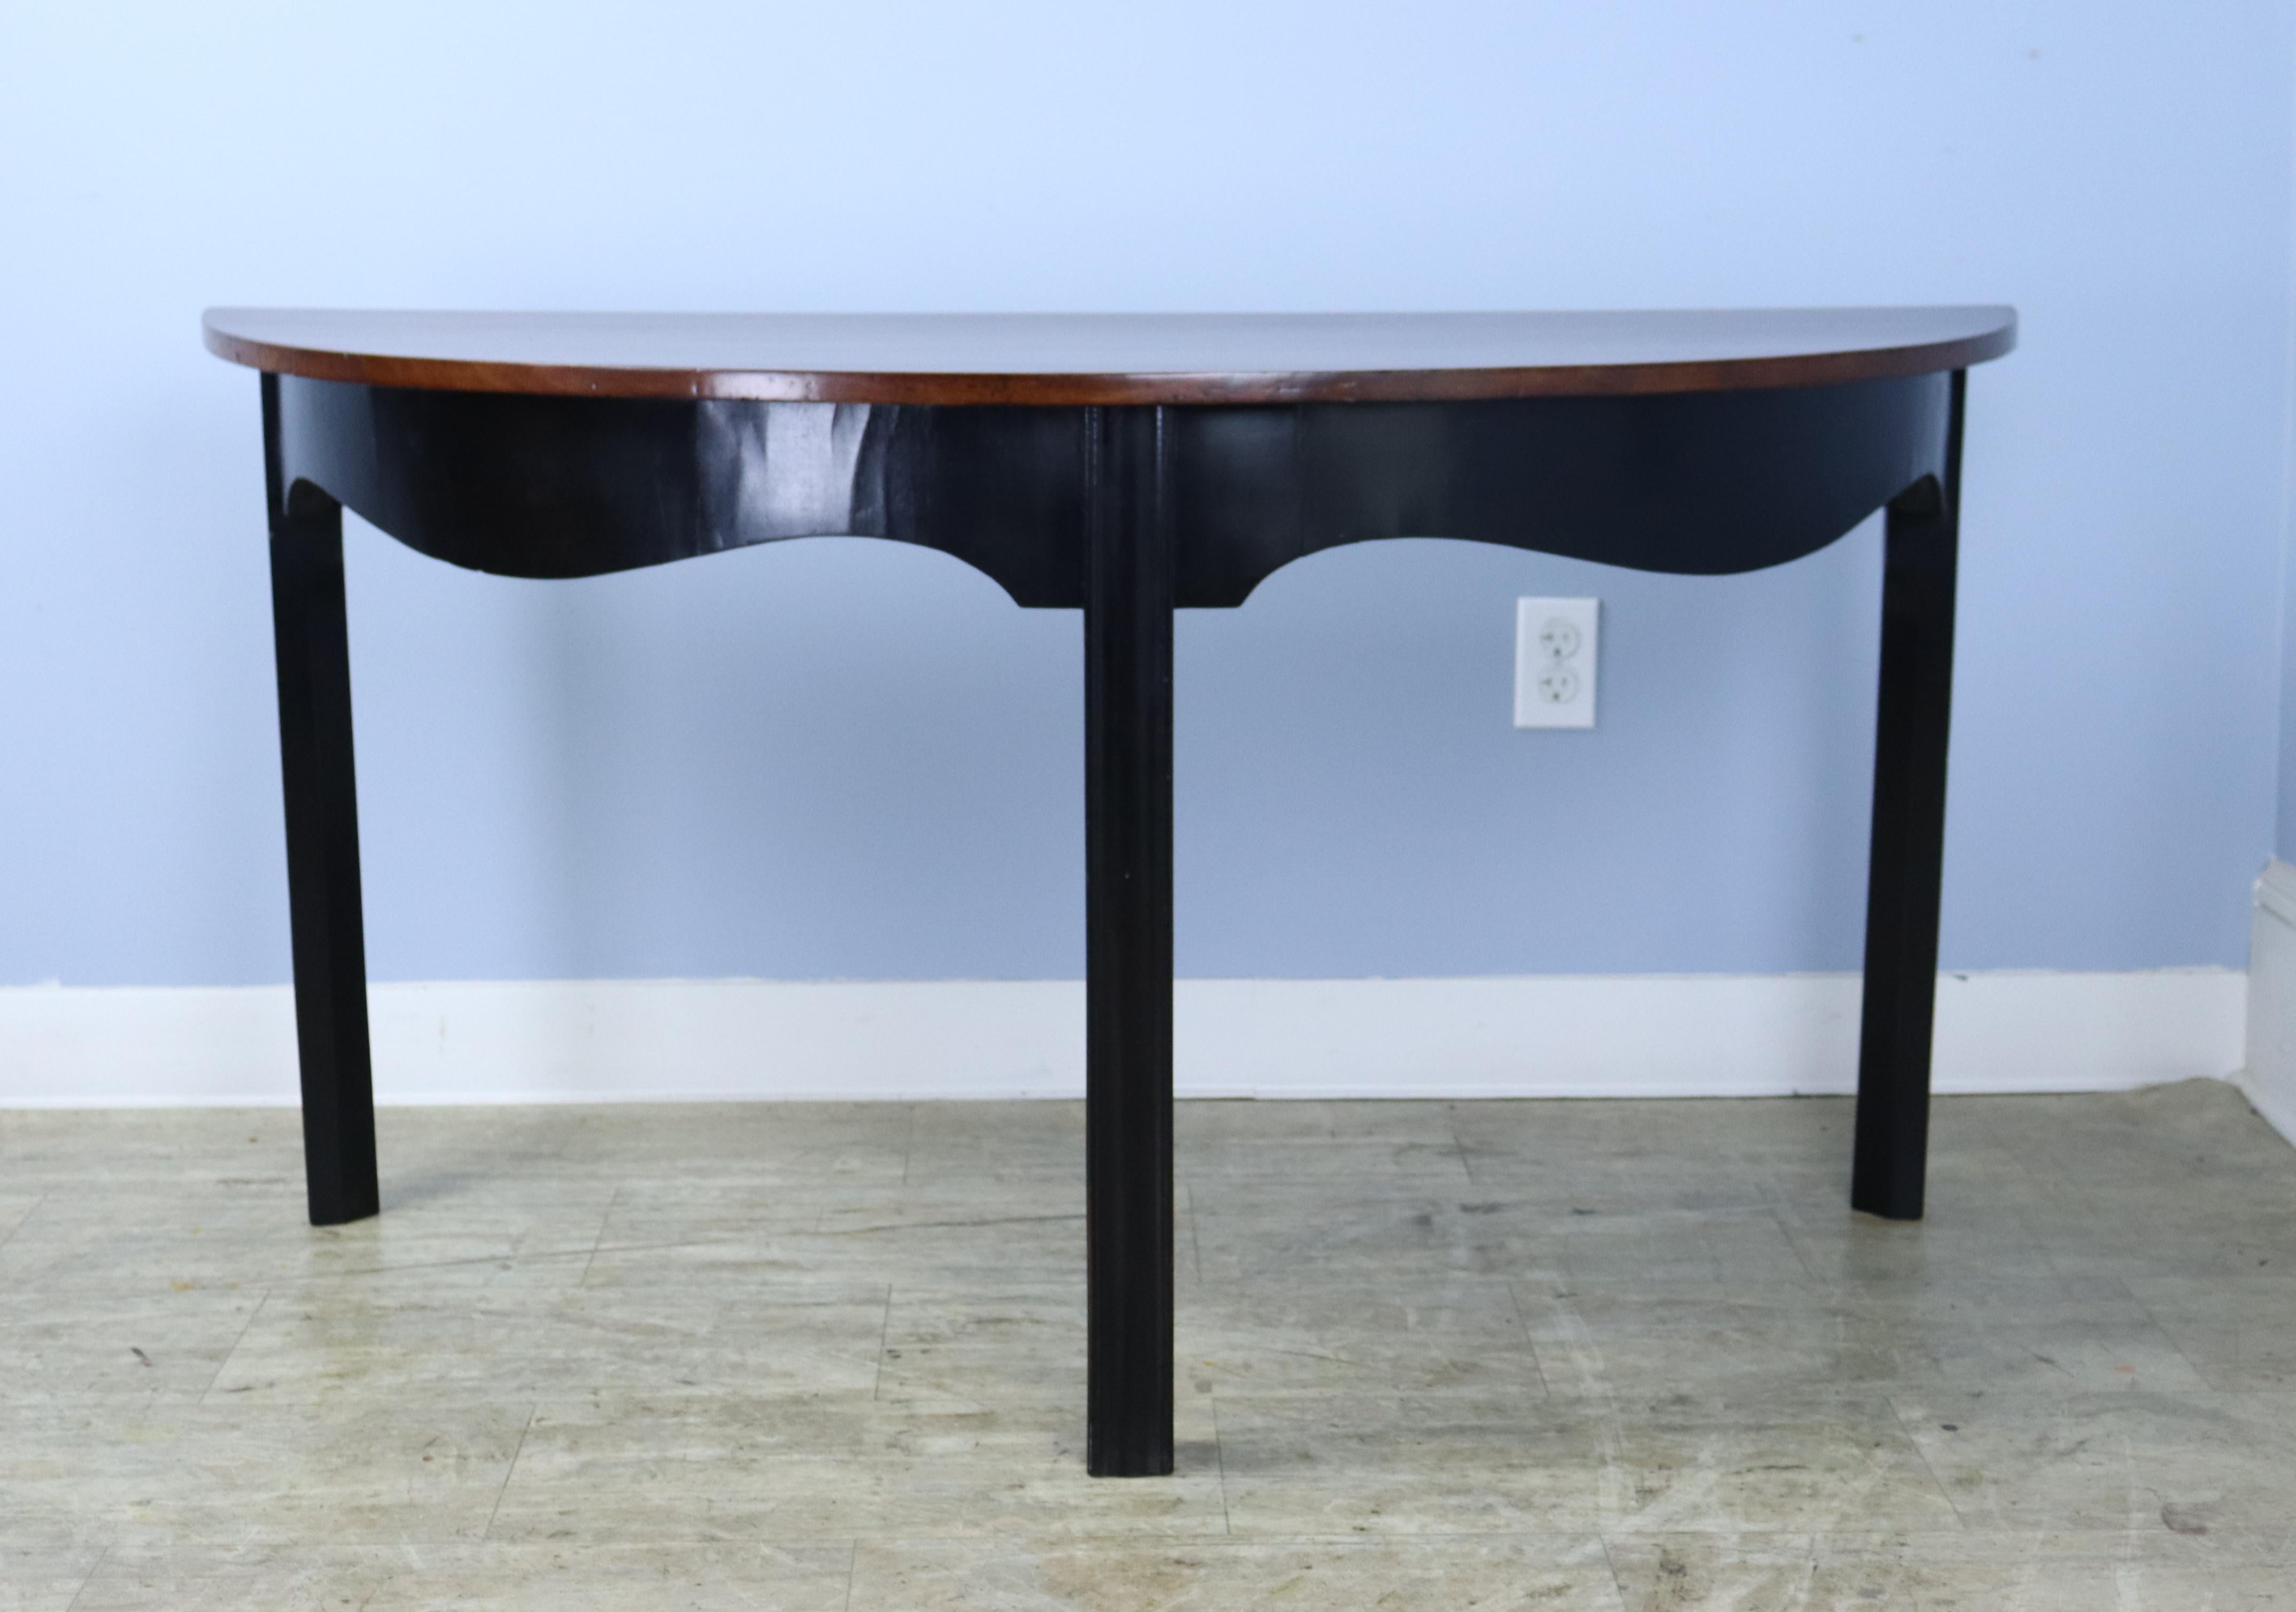 A pair of large walnut demi-lune console tables with ebonized bases.  Would look smart on either side of an archway or window.  Note that when put together, they do not form a perfect circle.  There are some light scratches and a small chip in one